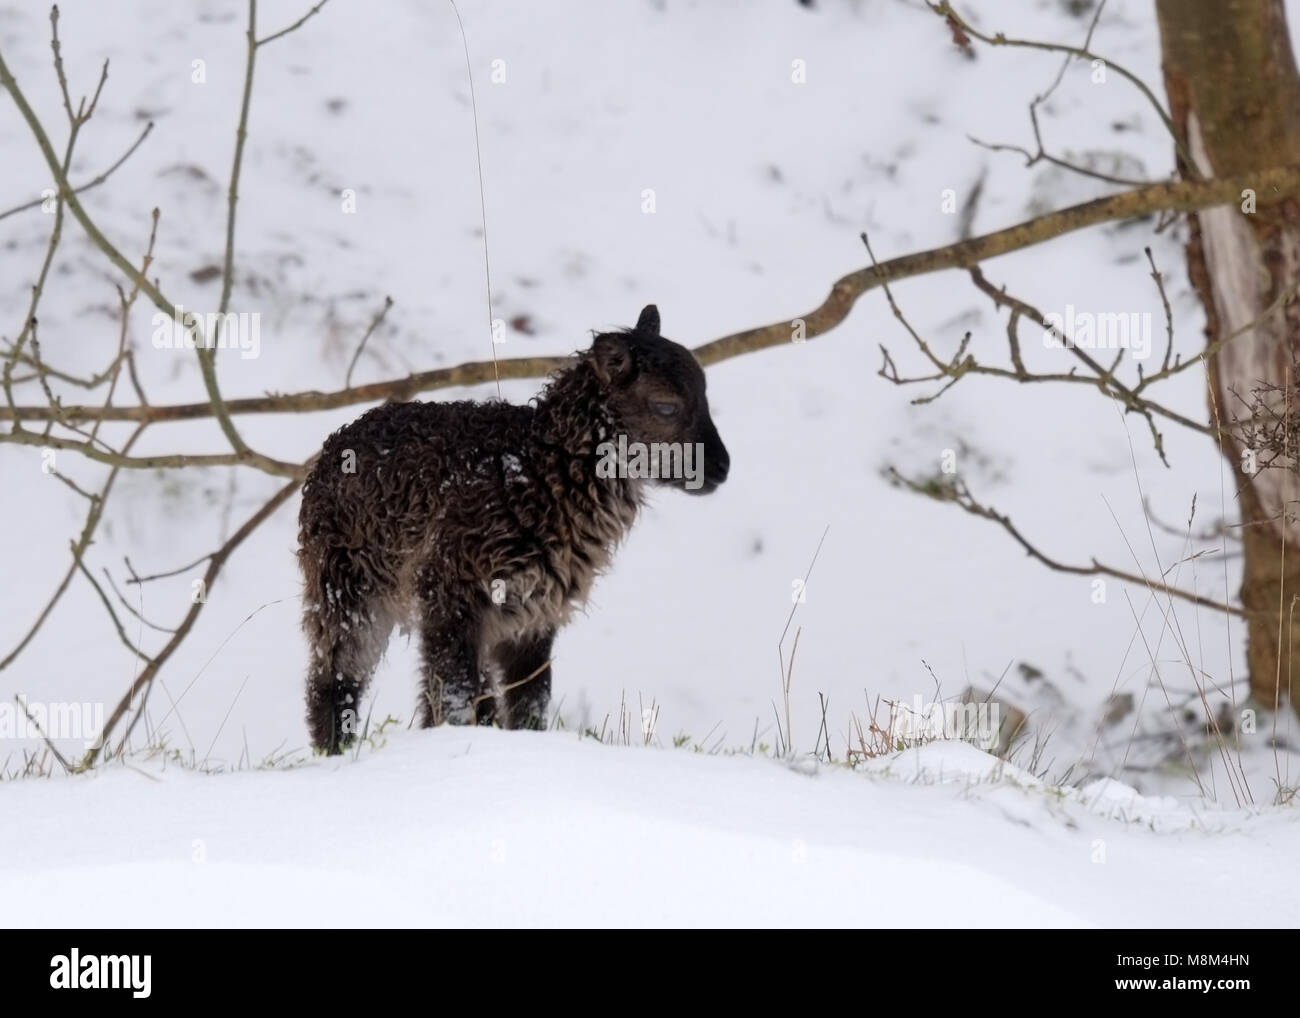 Cheddar Gorge, UK. 18th March 2018 - Feral soay sheep and lambs  in the snows of Cheddar Gorge. Credit: Timothy Large/Alamy Live News Stock Photo